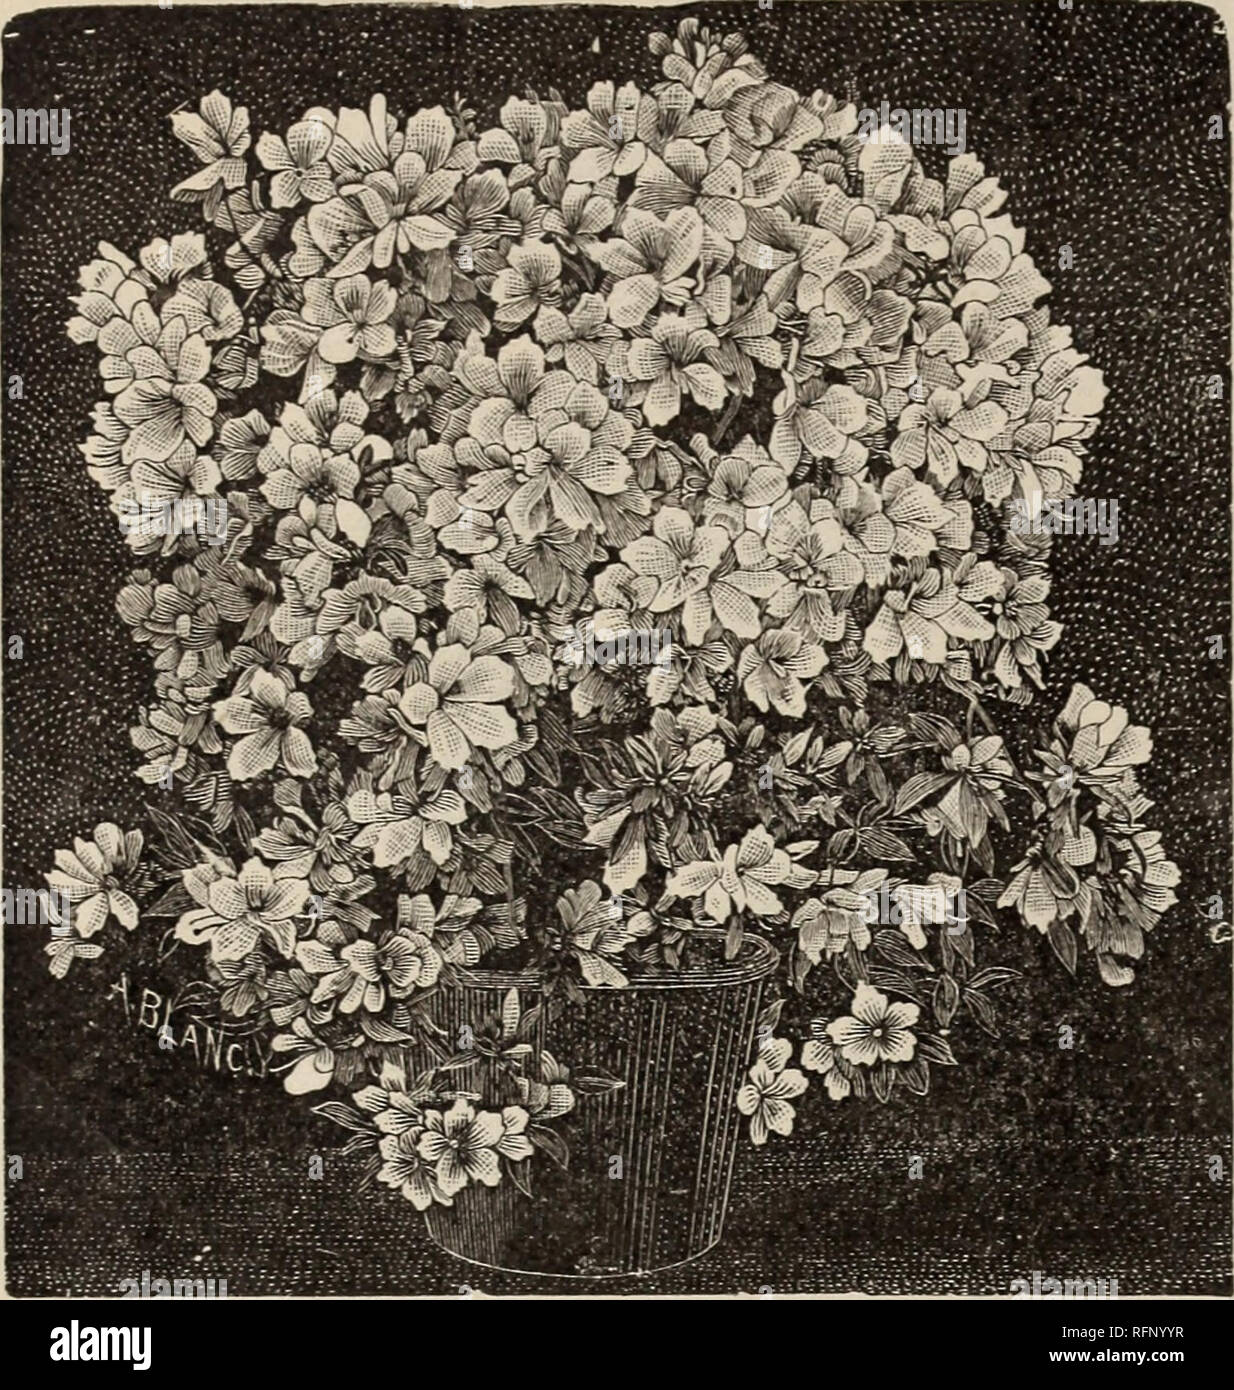 . Special florists' trade list : fall, 1896. Nursery stock Ohio Catalogs; Plants, Ornamental Catalogs; Flowers Catalogs; Bulbs (Plants) Catalogs; Nursery stock; Plants, Ornamental; Flowers; Bulbs (Plants). THE STORRS &amp; HARRISON COMPANY, General Collection of Plants for Florists*. AZALEA INDICA. AZALEAS. Fine shapely plants with bushy crowns, well set with buds, and of varieties the most desirable for florists' use. Order early and have them shipped during October, when they can be forwarded per- fectly safe by fast freight, and save heavy express charges. Per 100 io to 12-inch crowns $35 0 Stock Photo